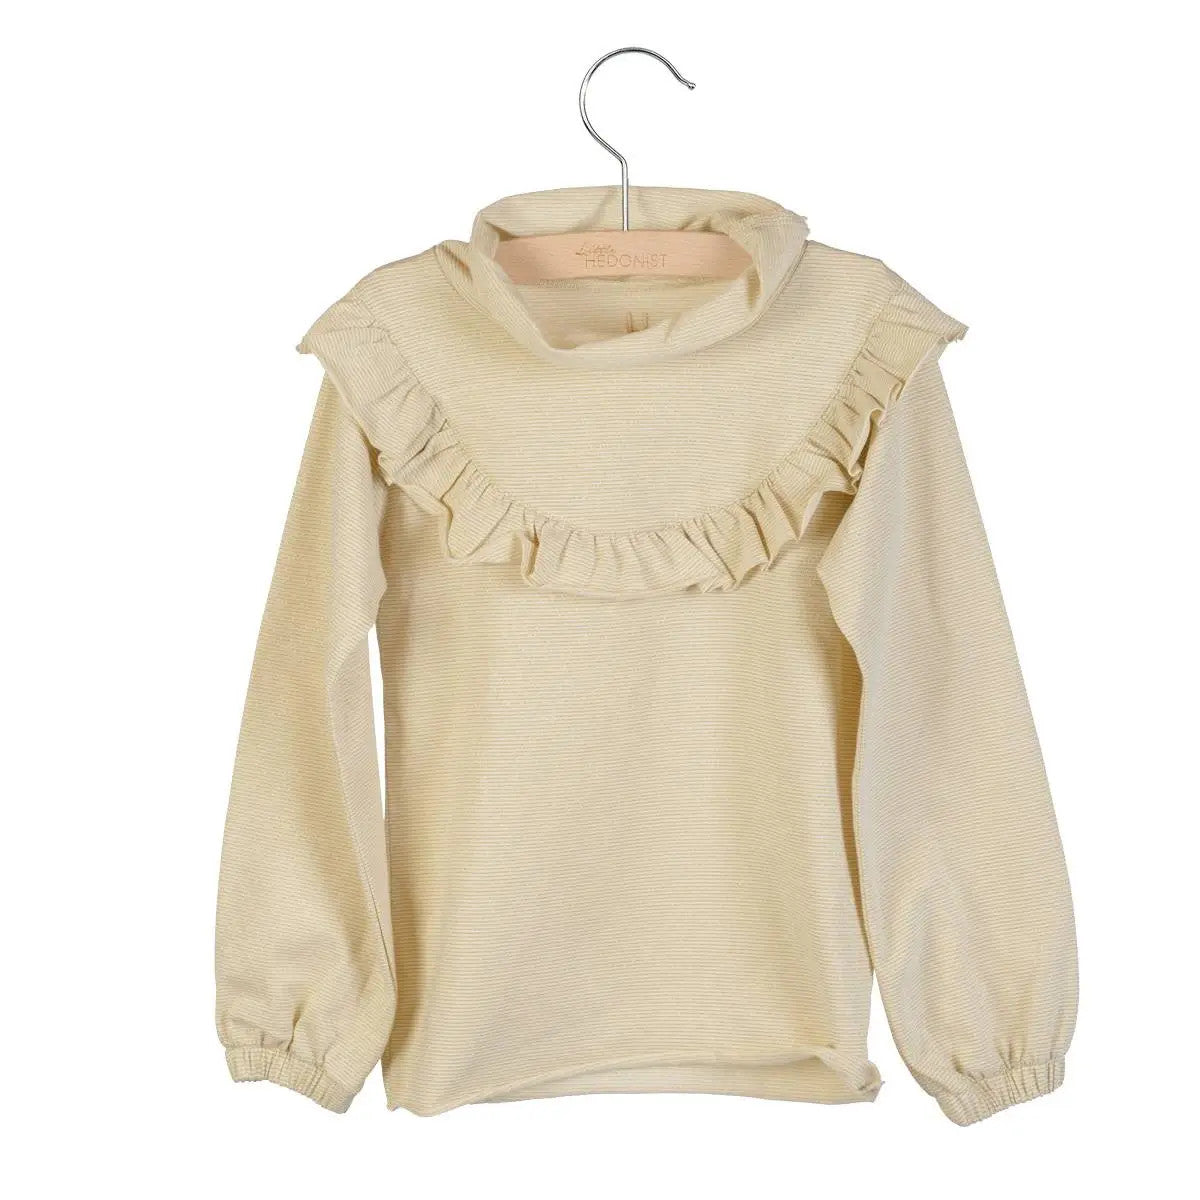 Little Hedonist girly organic cotton top for fancy occasions. In a light beige tint.